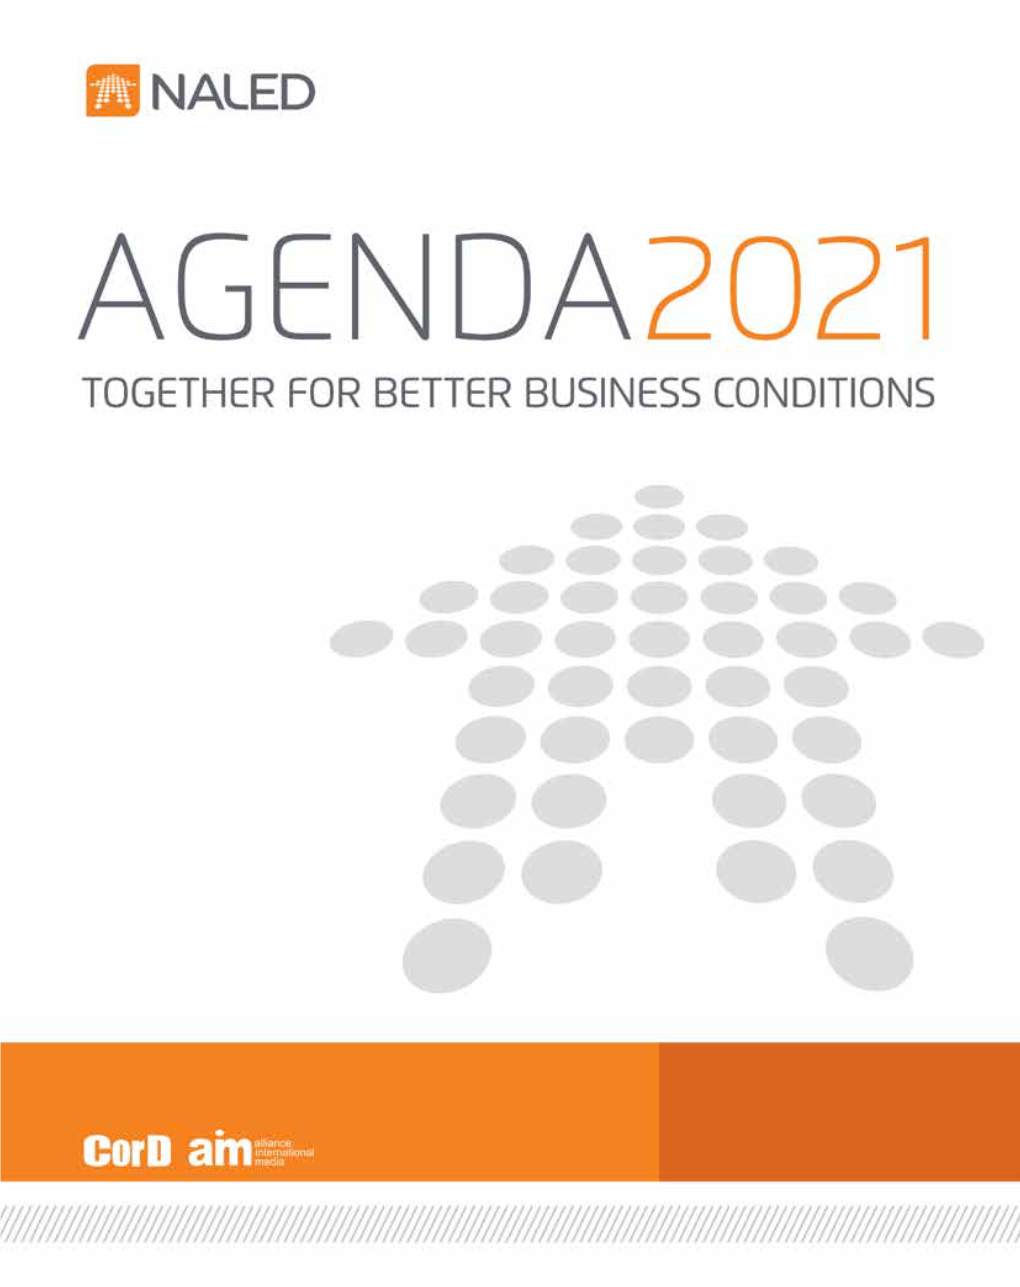 Agenda-2021-Towards-Better-Business-Conditions.Pdf